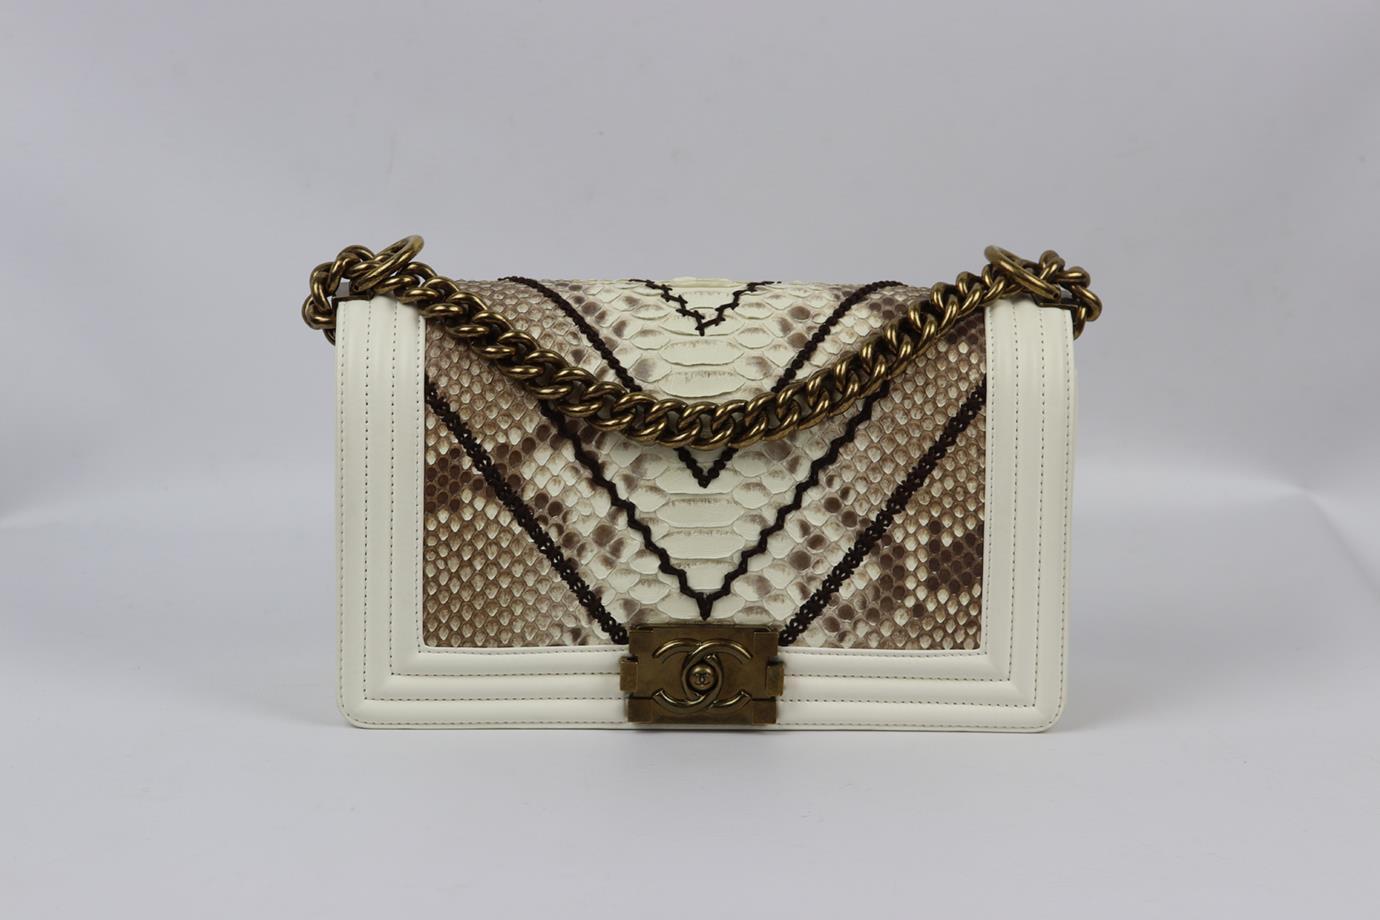 <ul>
<li>Chanel 2015 Boy medium embroidered python and leather shoulder bag.</li>
<li>Made from tonal-beige python and cream leather with matching leather interior and brown embroidery and silver-tone hardware and chain shoulder